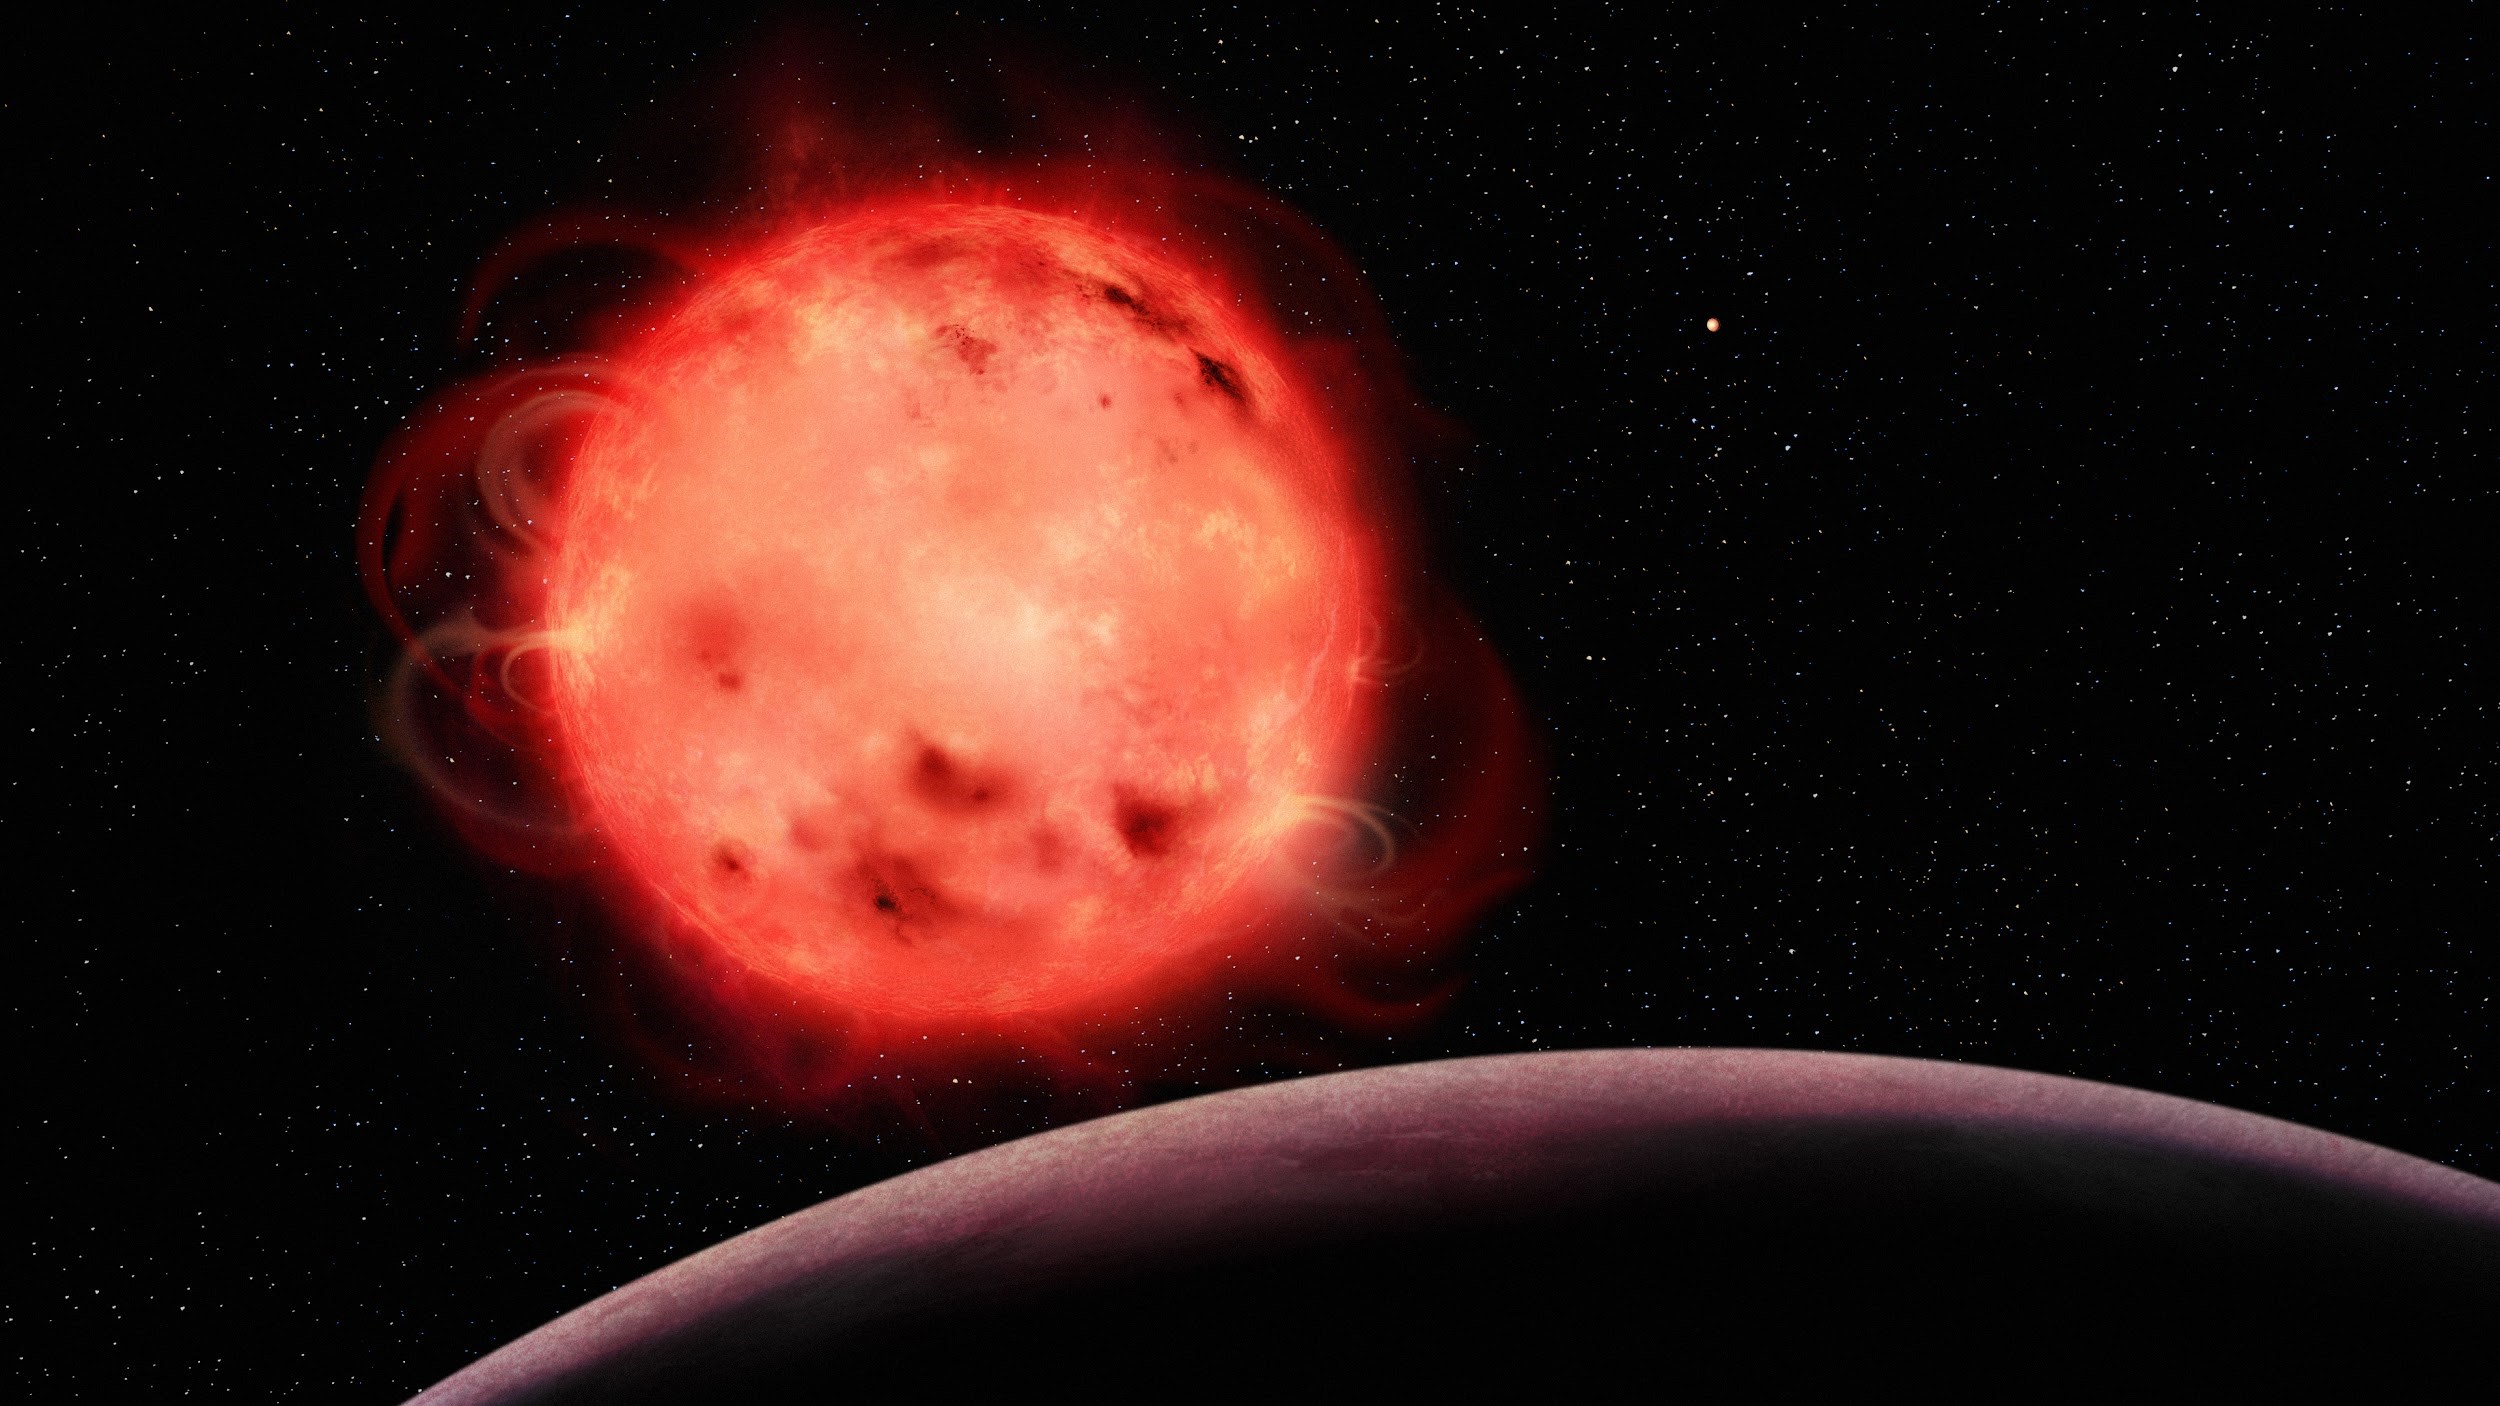 artistic representation of the TRAPPIST-1 red dwarf star